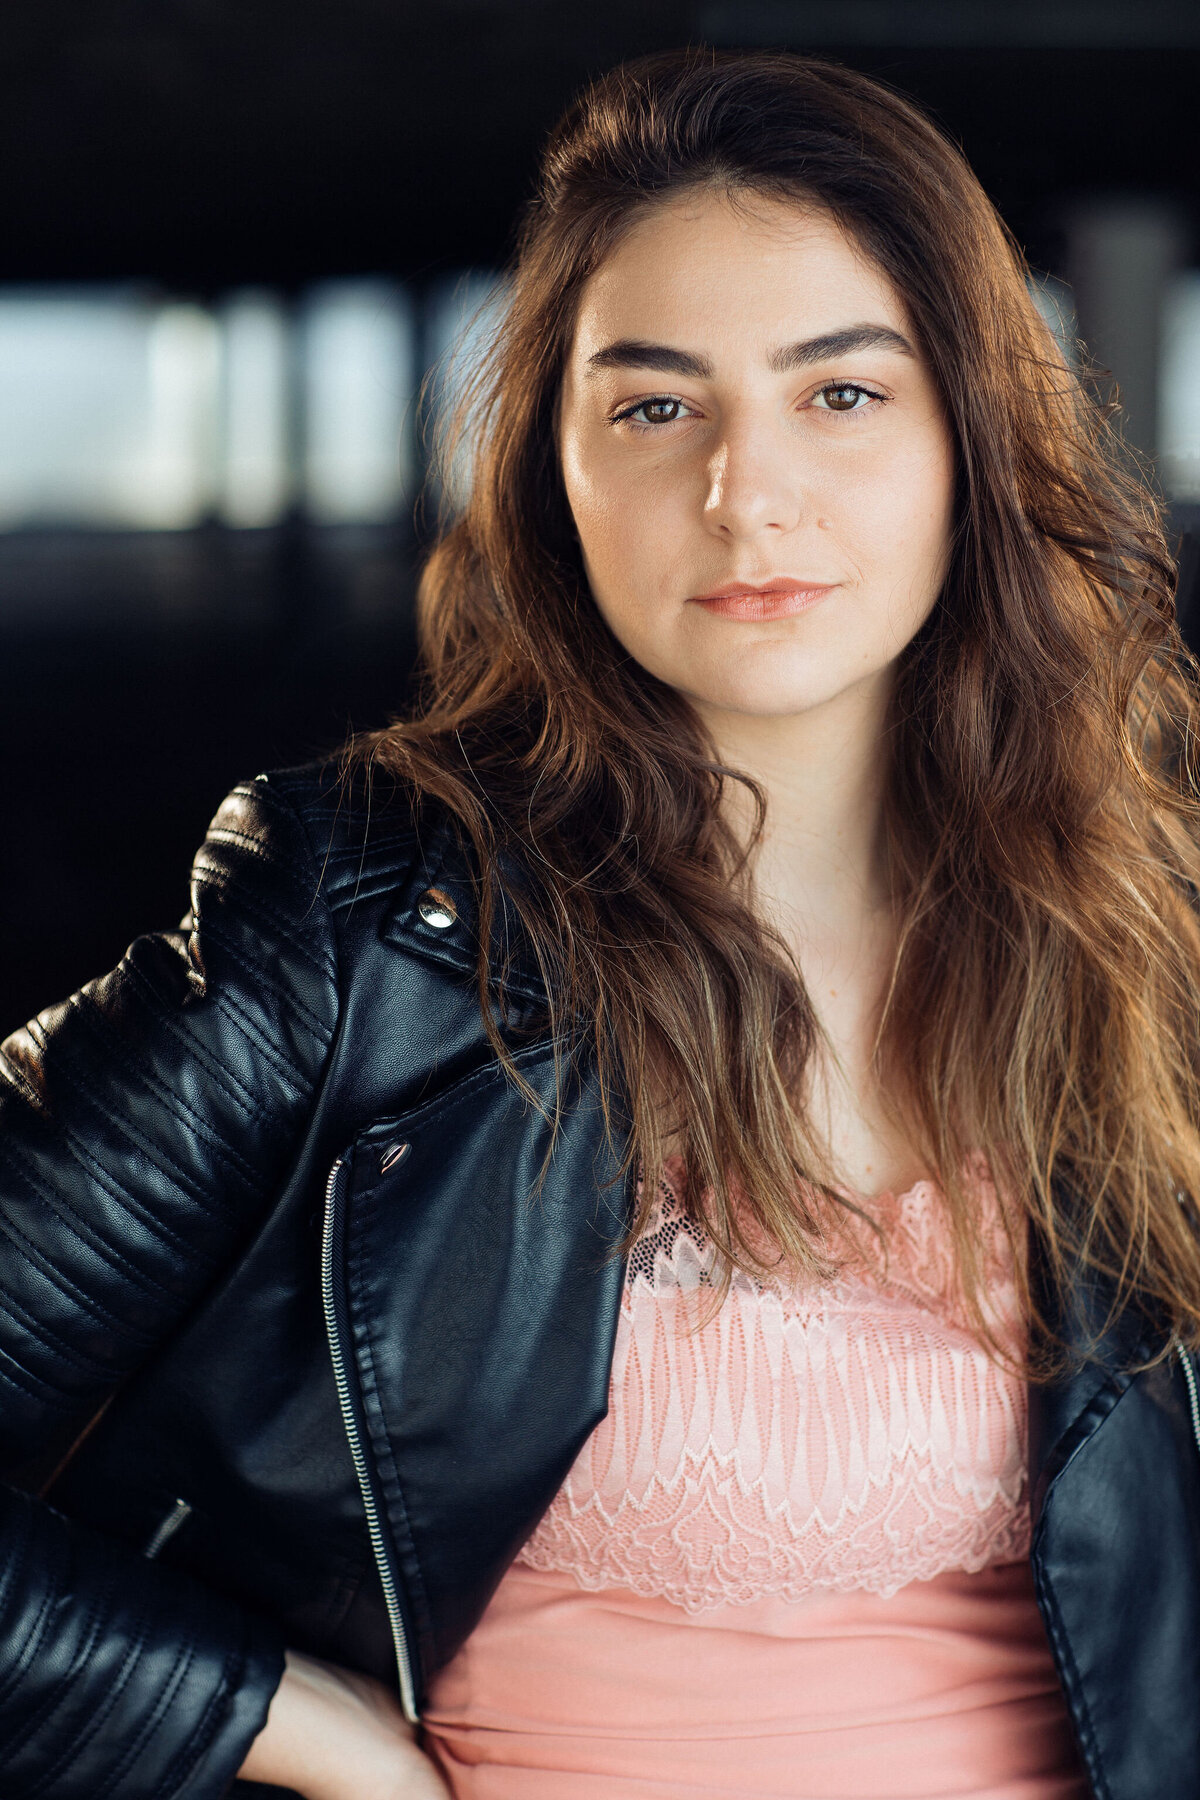 Headshot Photograph Of Young Woman In Outer Black Leather Jacket And Inner Pink Blouse Los Angeles